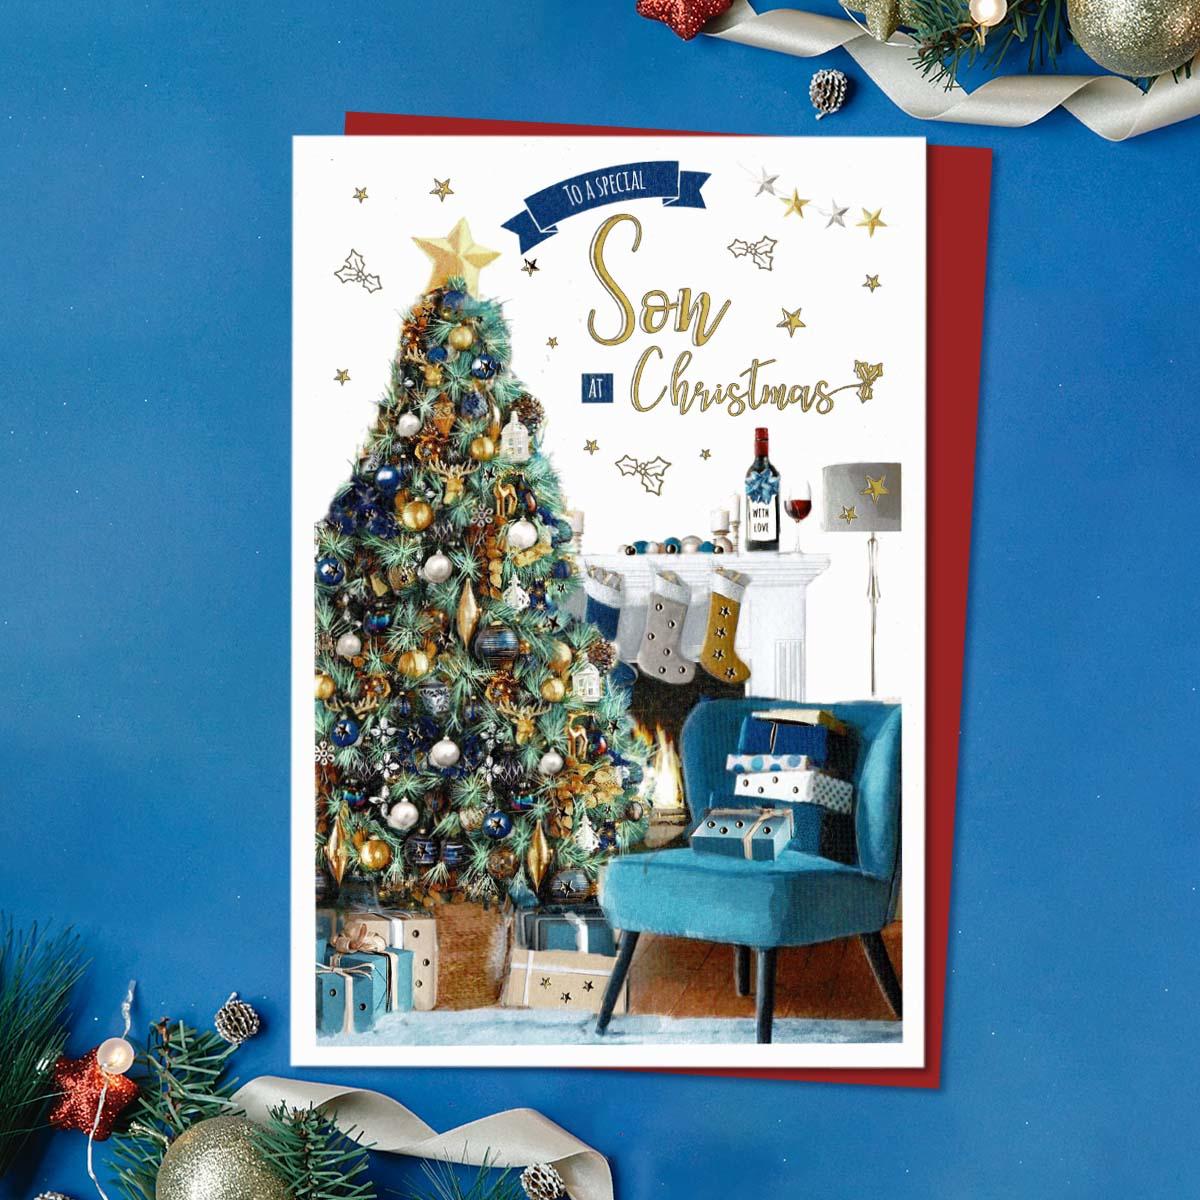 Special Son Christmas Tree Card Front Image